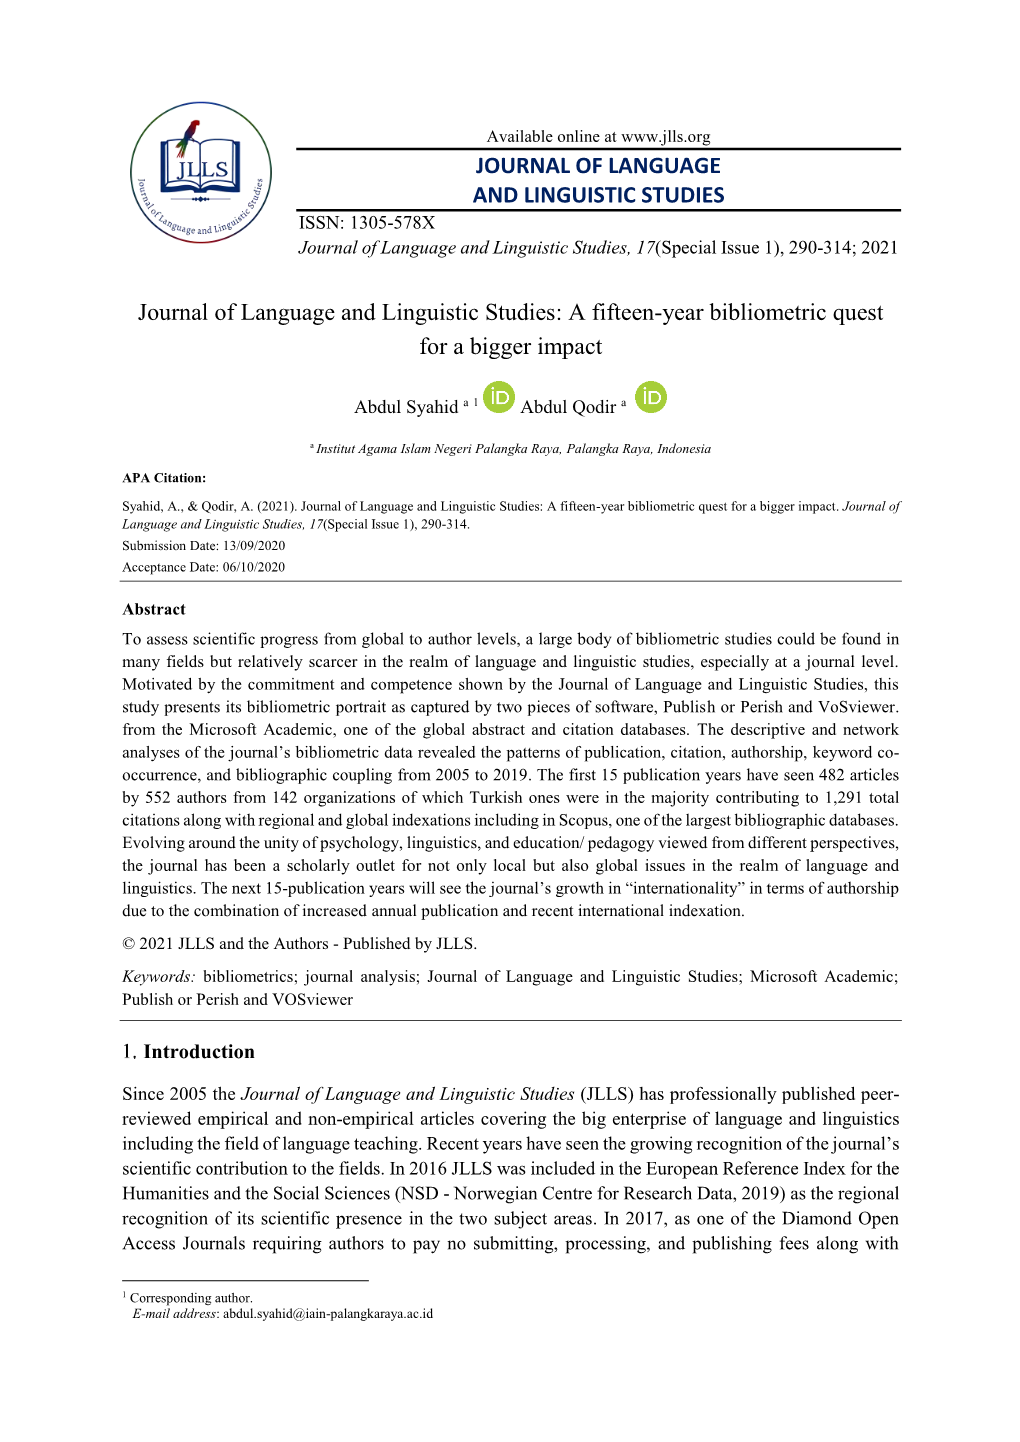 Journal of Language and Linguistic Studies: a Fifteen-Year Bibliometric Quest for a Bigger Impact